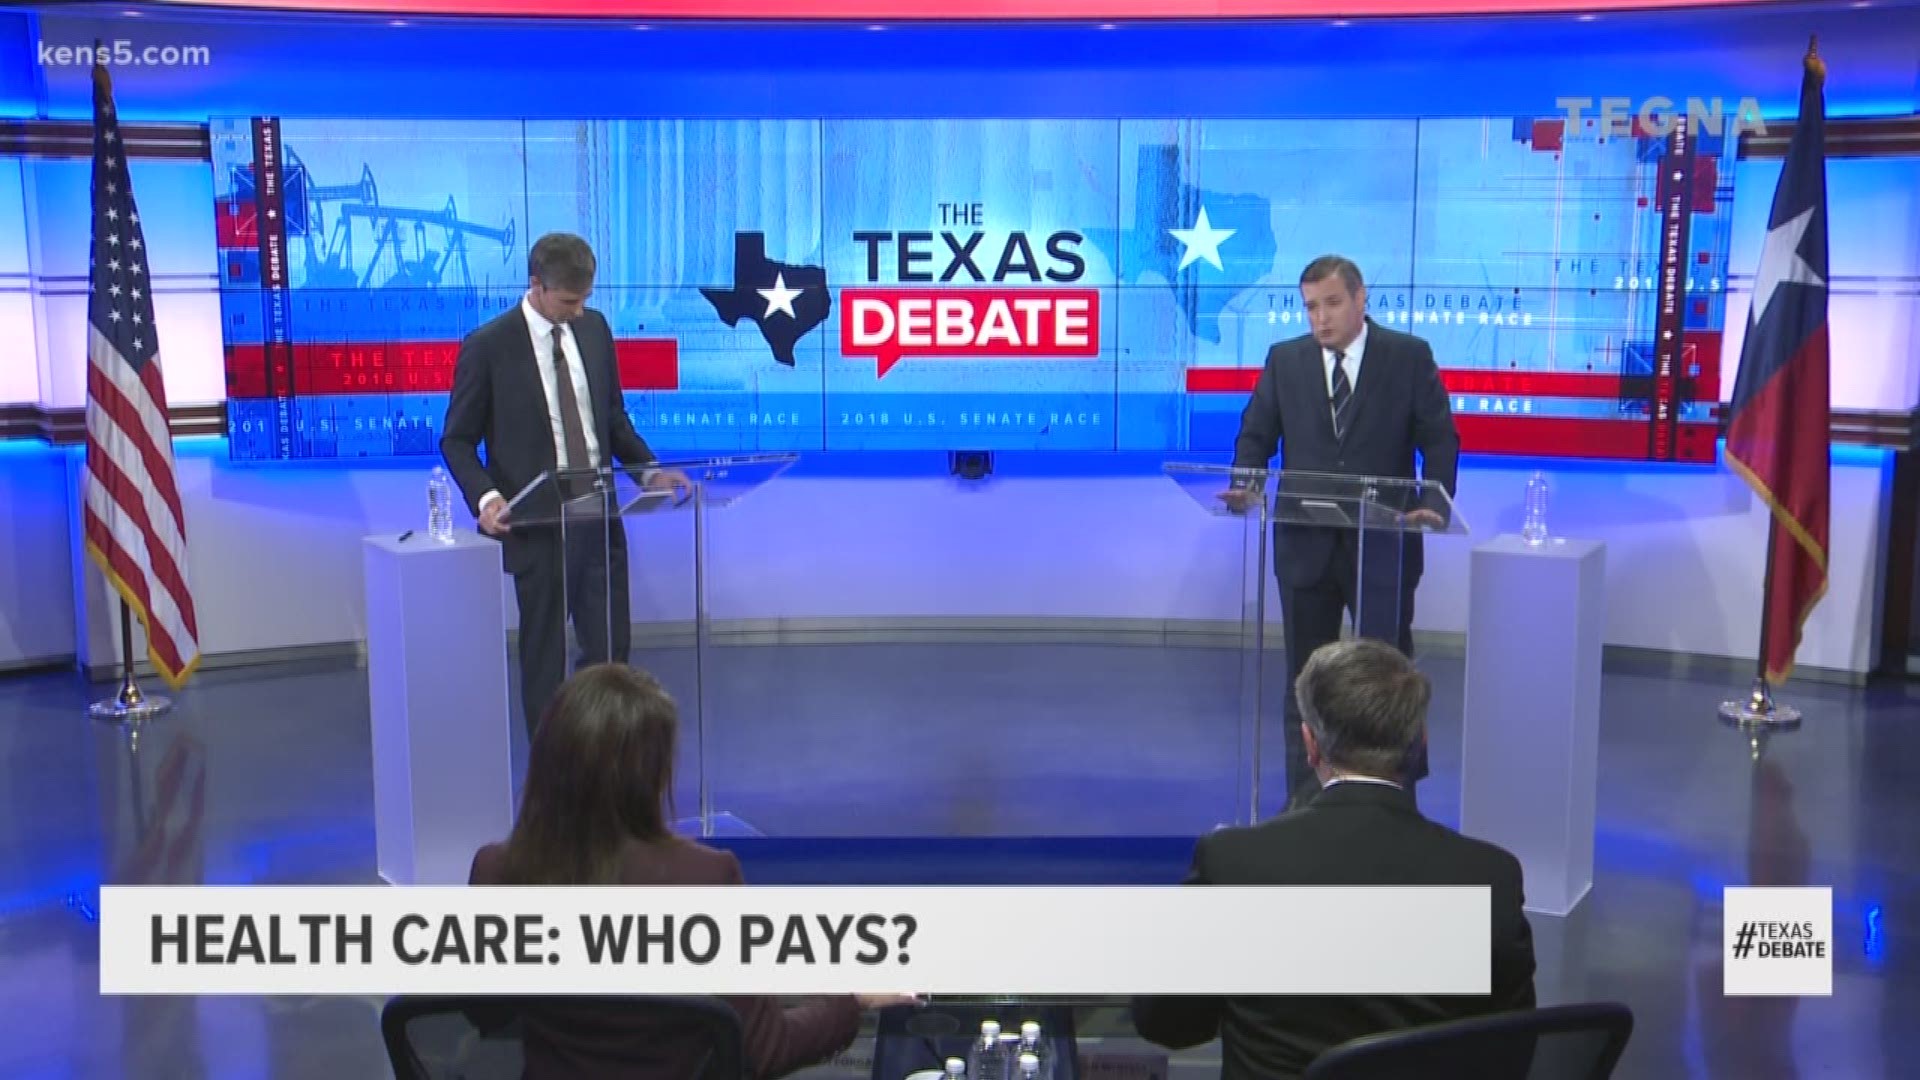 Sen. Ted Cruz says that candidate Beto O'Rourke's plan to fund his health care plan would be unfeasible and would bankrupt Medicare.